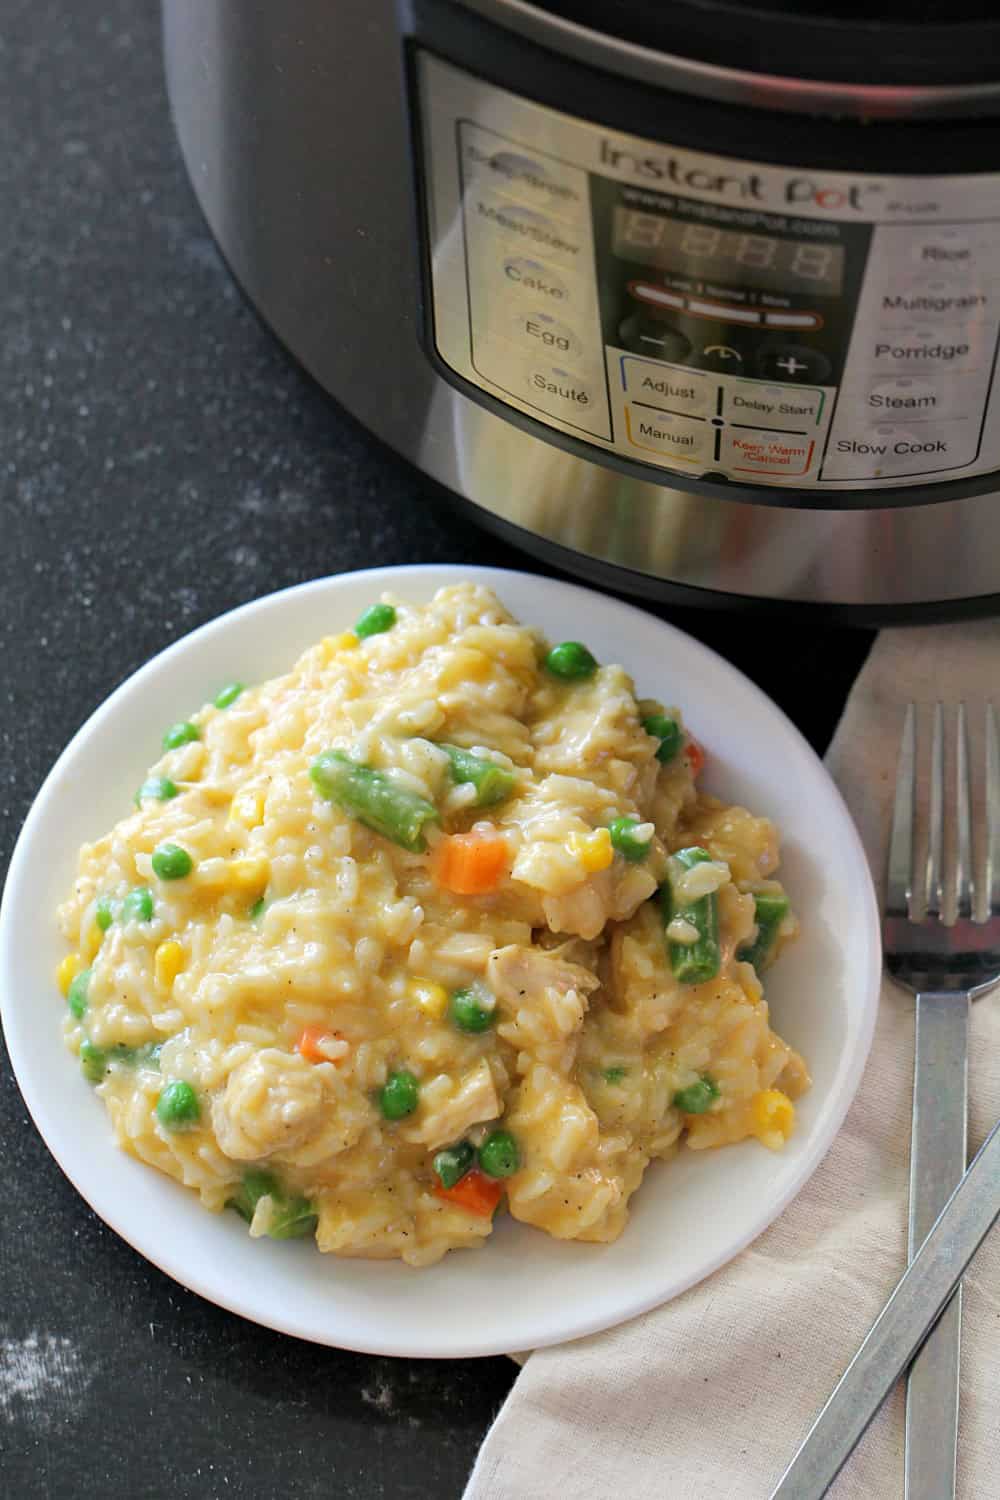 https://www.sixsistersstuff.com/wp-content/uploads/2019/09/Instant-Pot-Cheesy-Chicken-and-Rice-from-SixSistersStuff.jpg